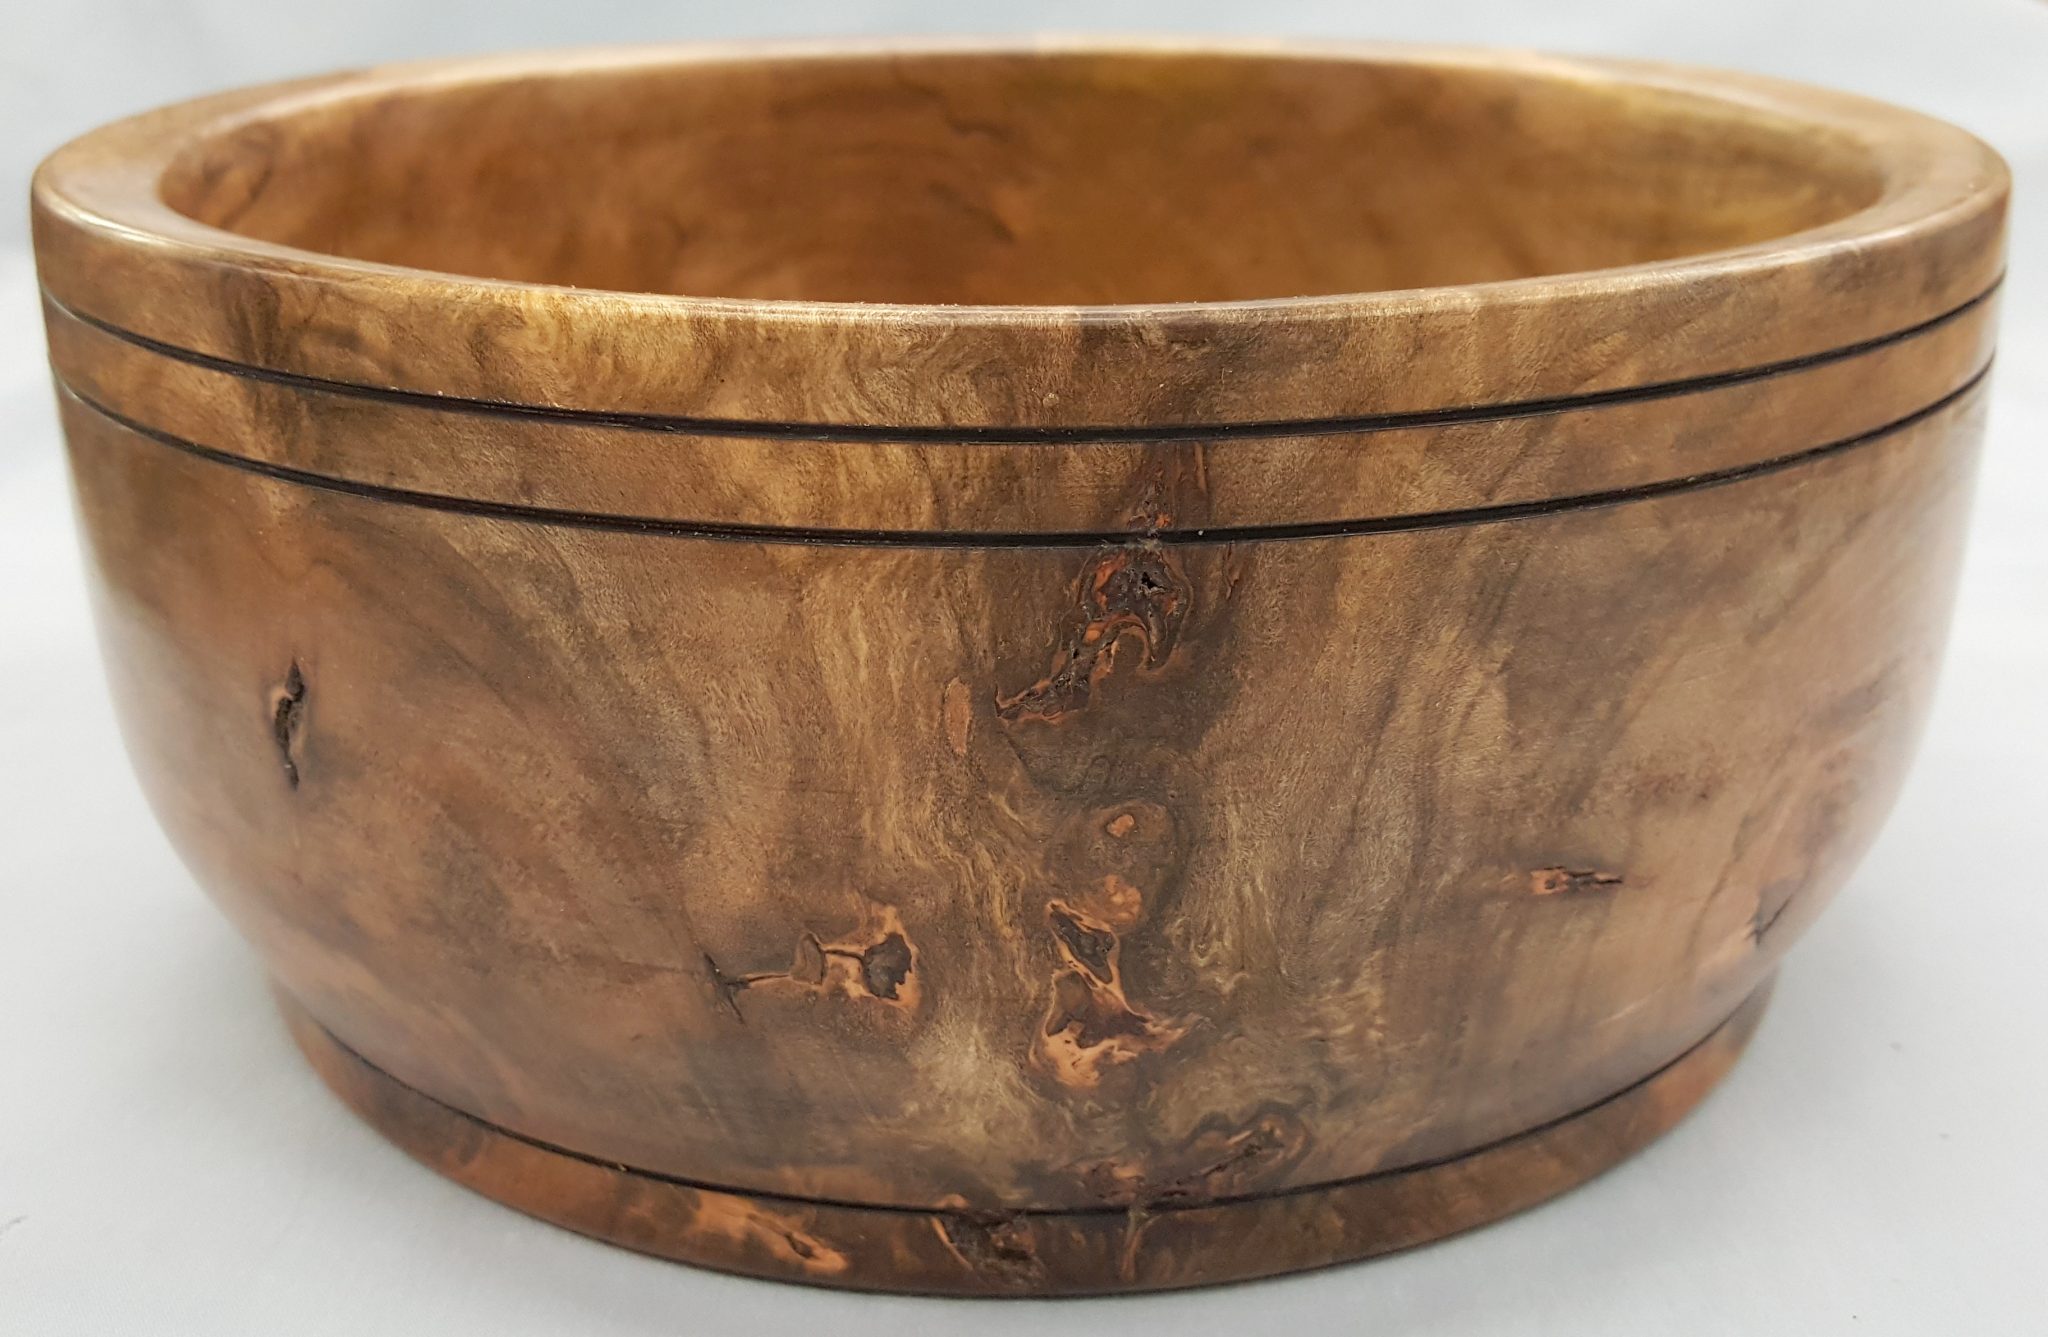 Highly Figured Southern Maple Bowl